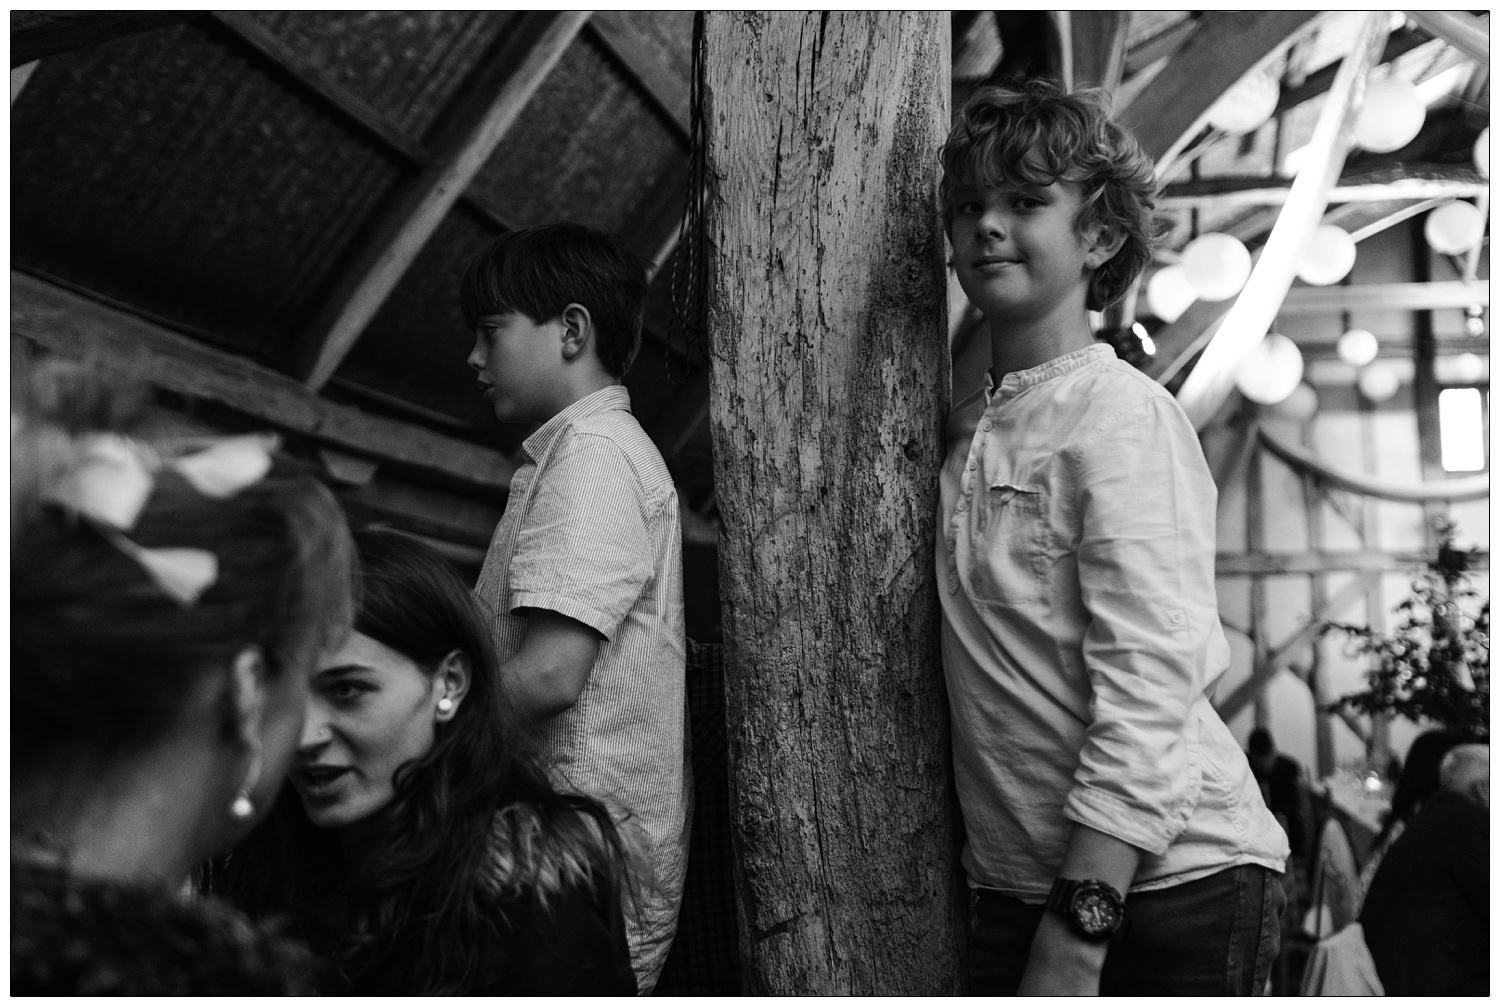 A boy leaning against a wooden post in a barn. A natural moment at a wedding.